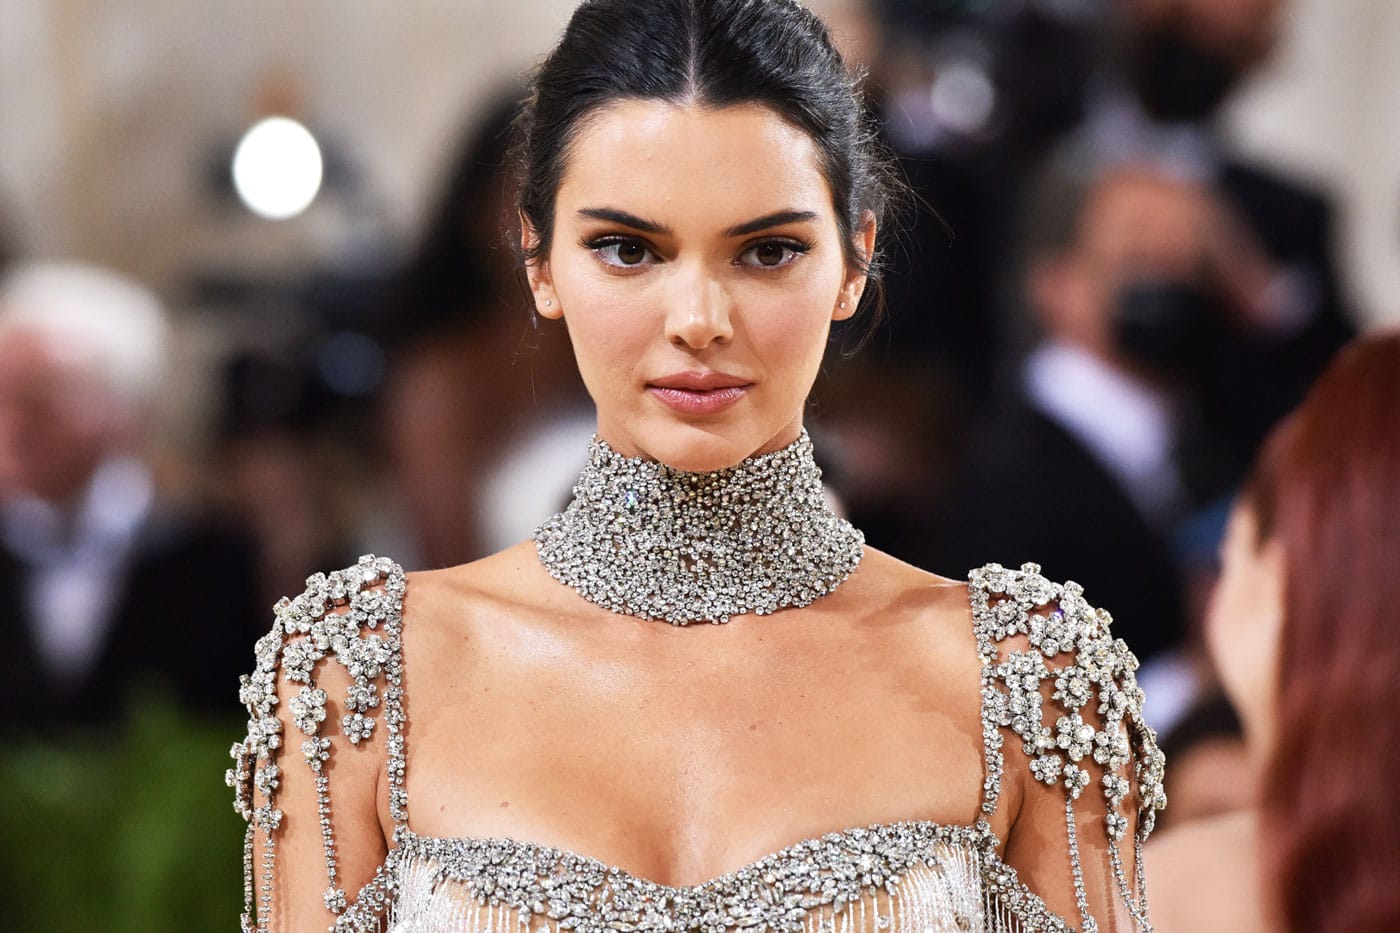 Kendall Jenners Poses in Sexy Gown Alongside Rumored Date Devin Booker